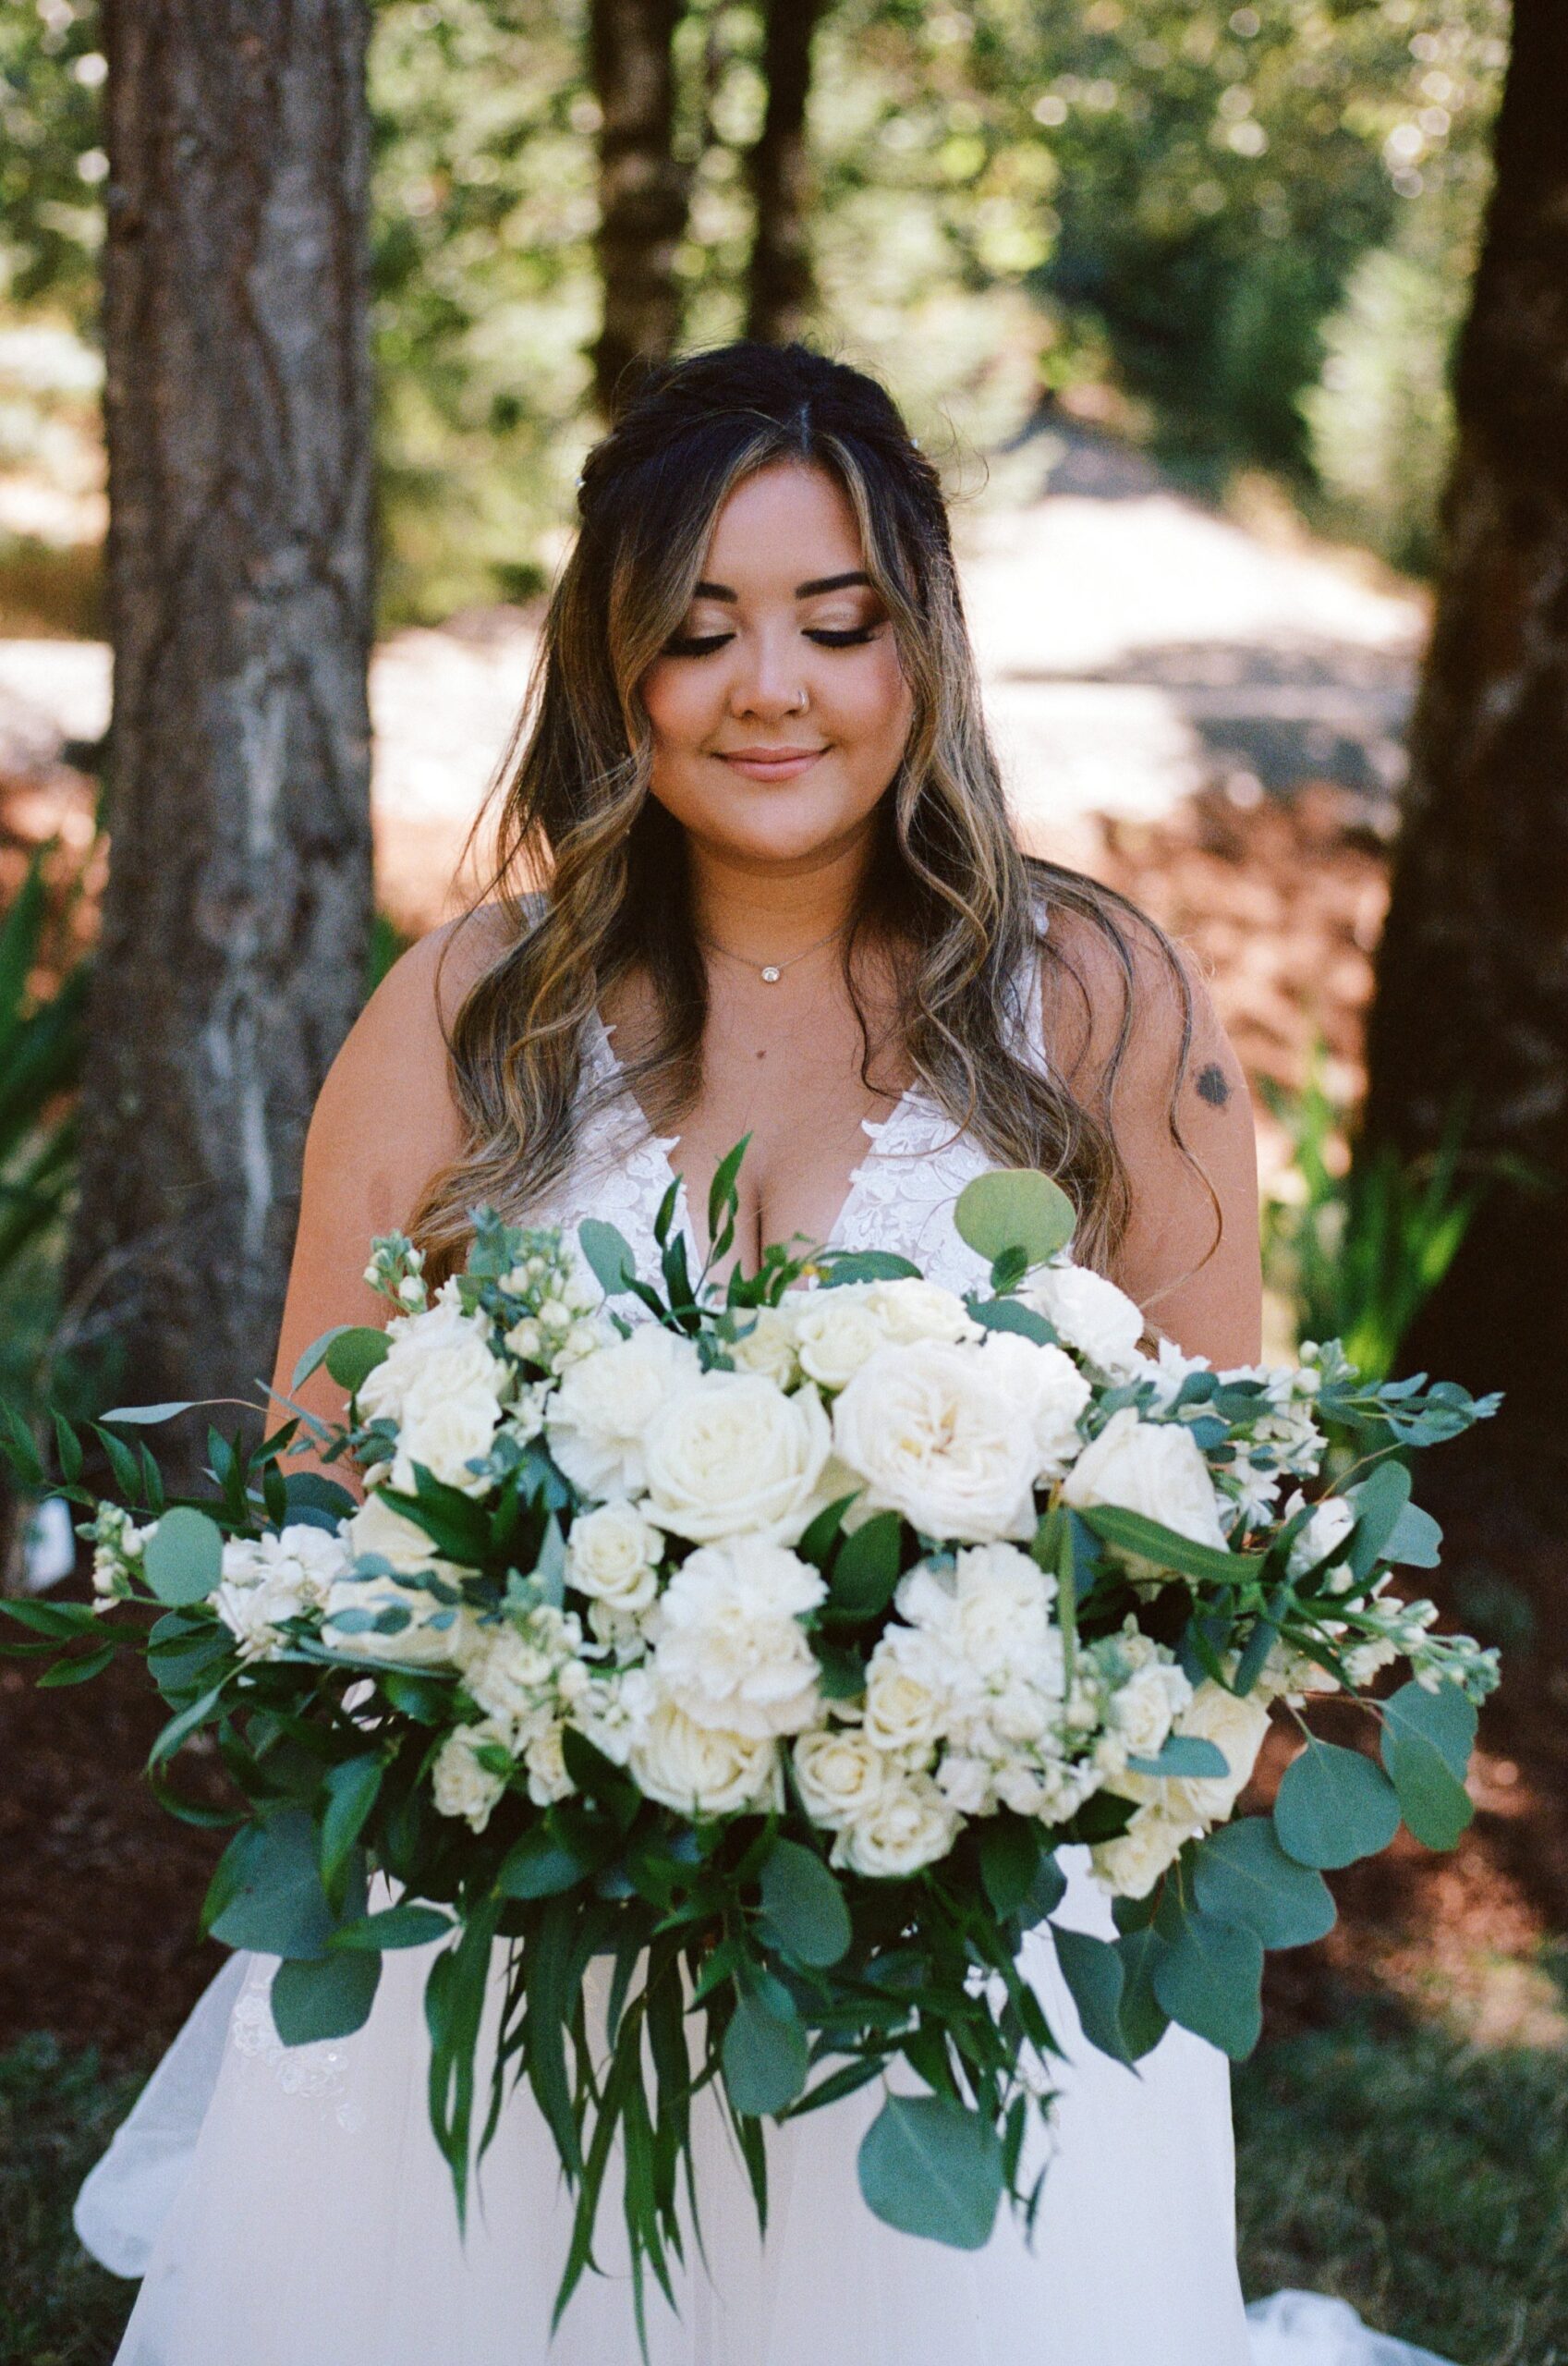 bride posing while holding wedding flower bouquet and closing her eyes. wedding photography in oregon, wedding film photos